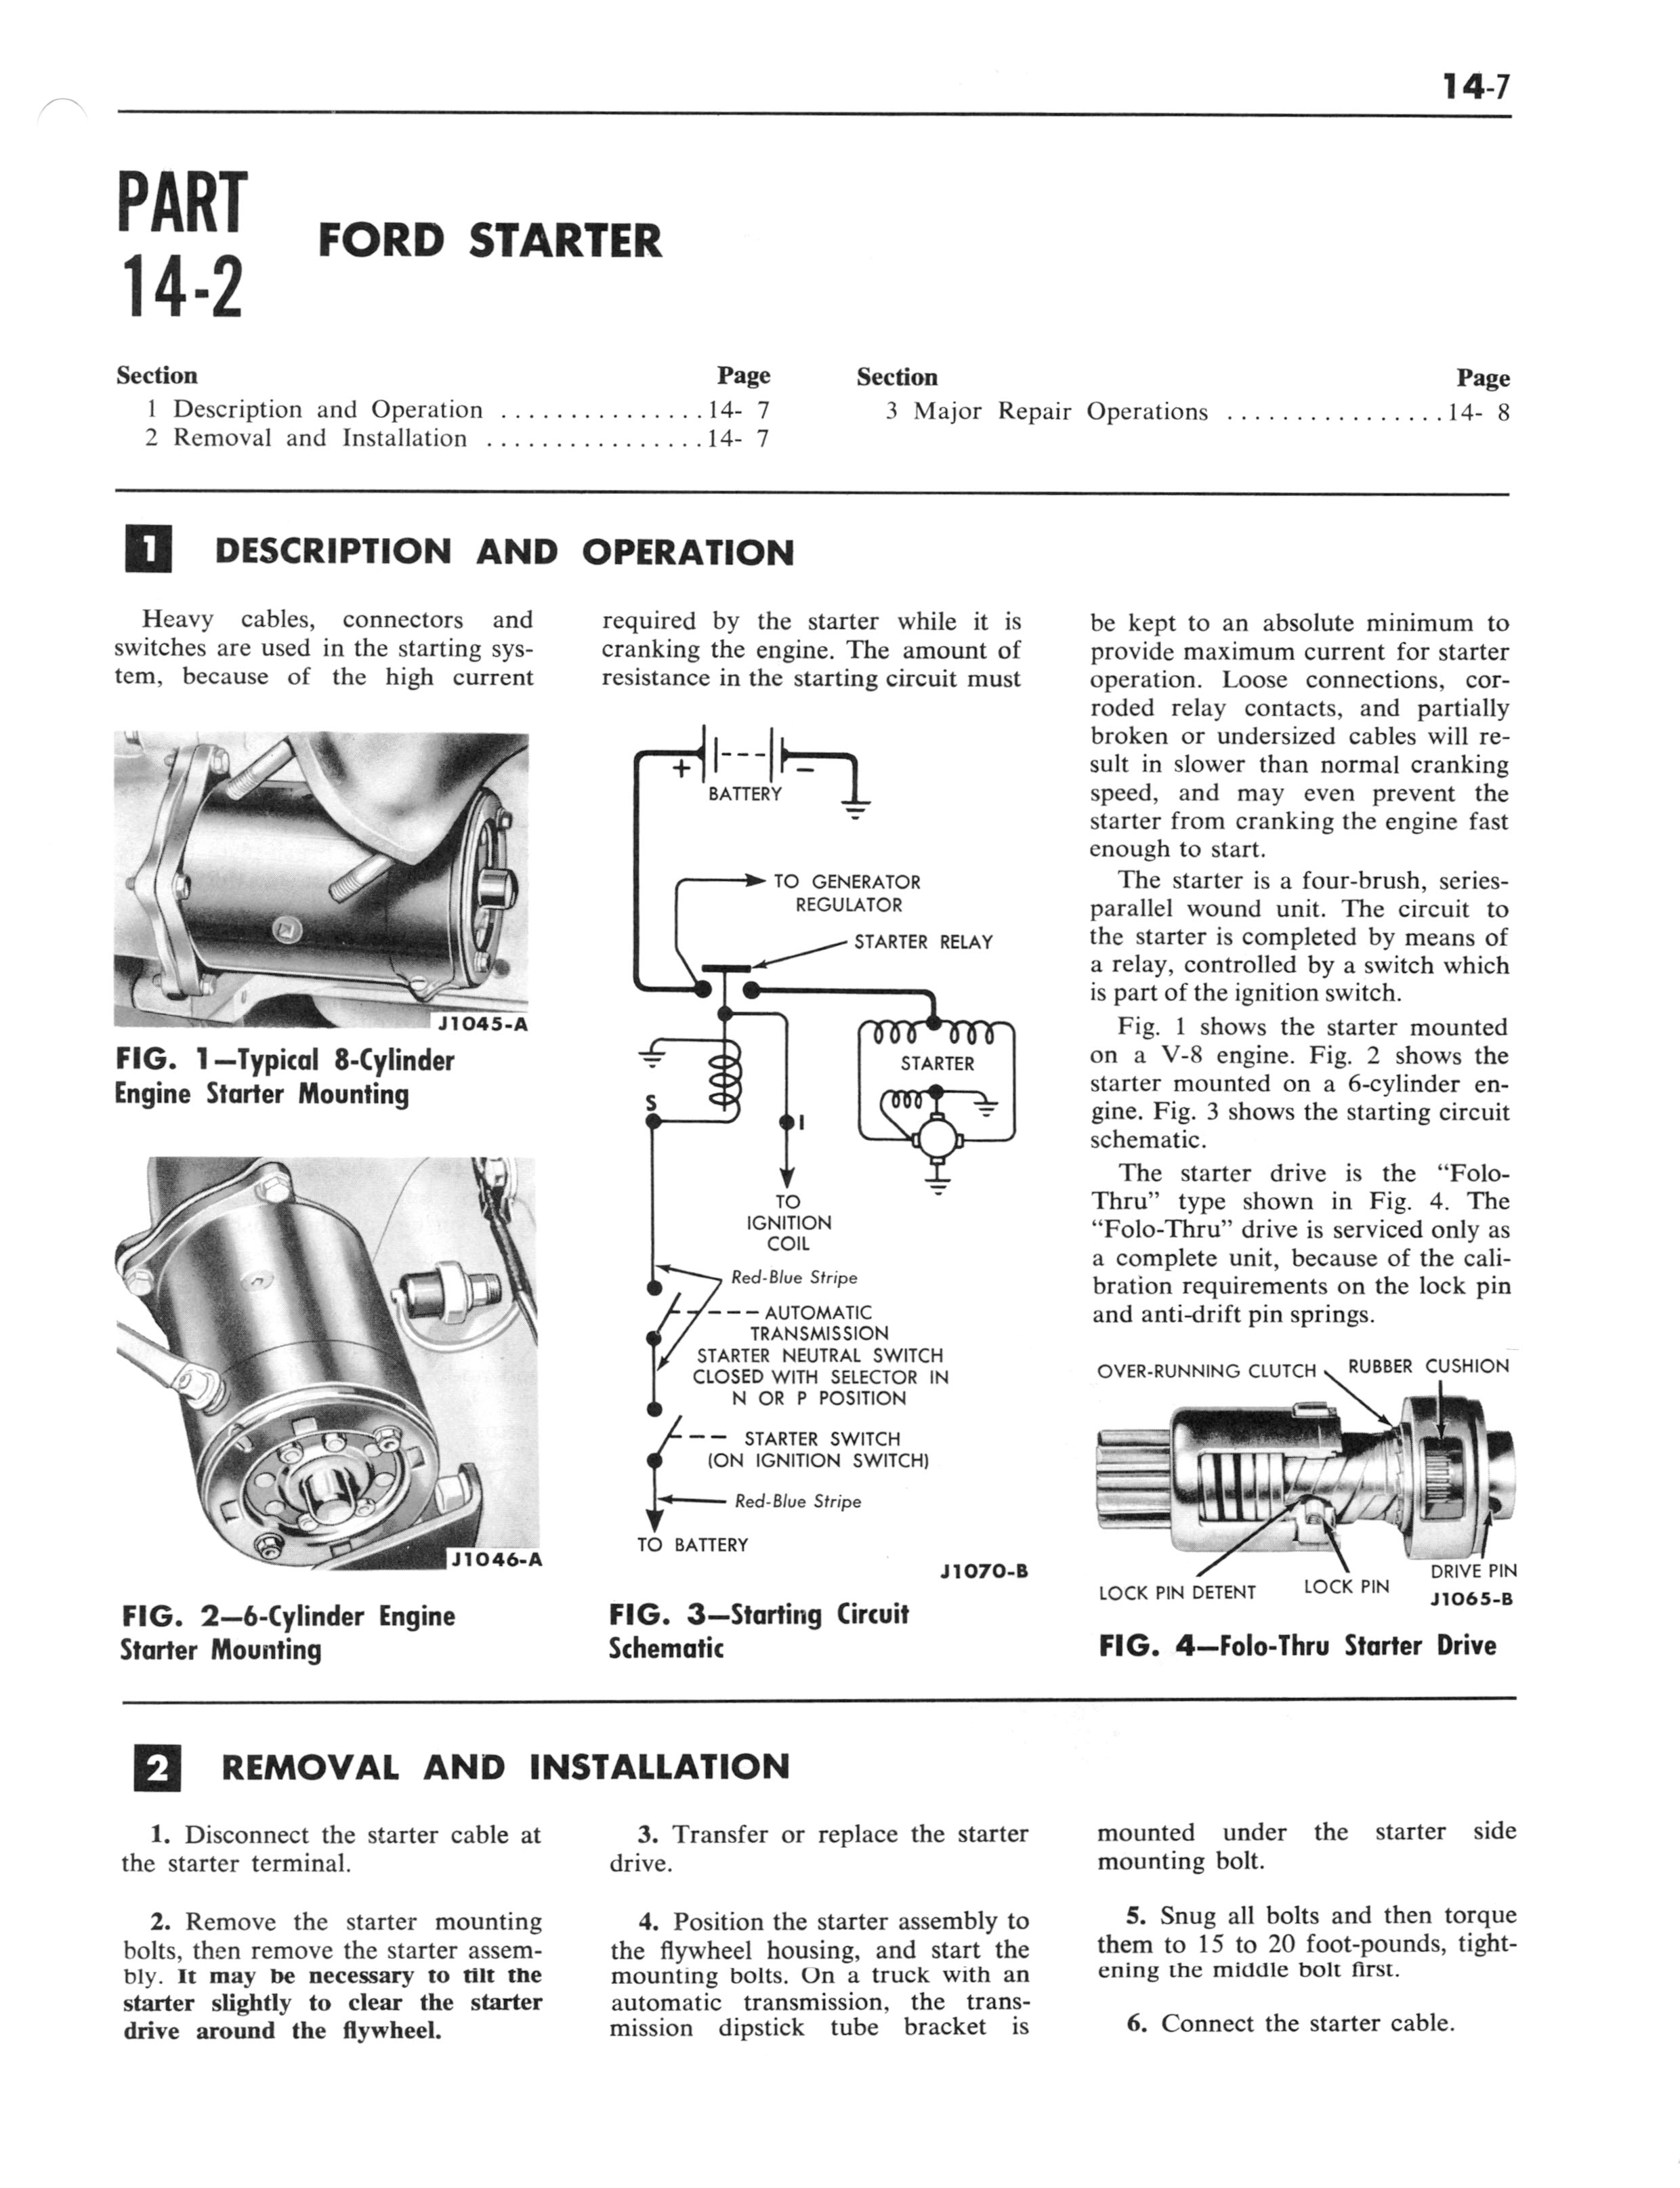 1964 Ford truck shop manual #4